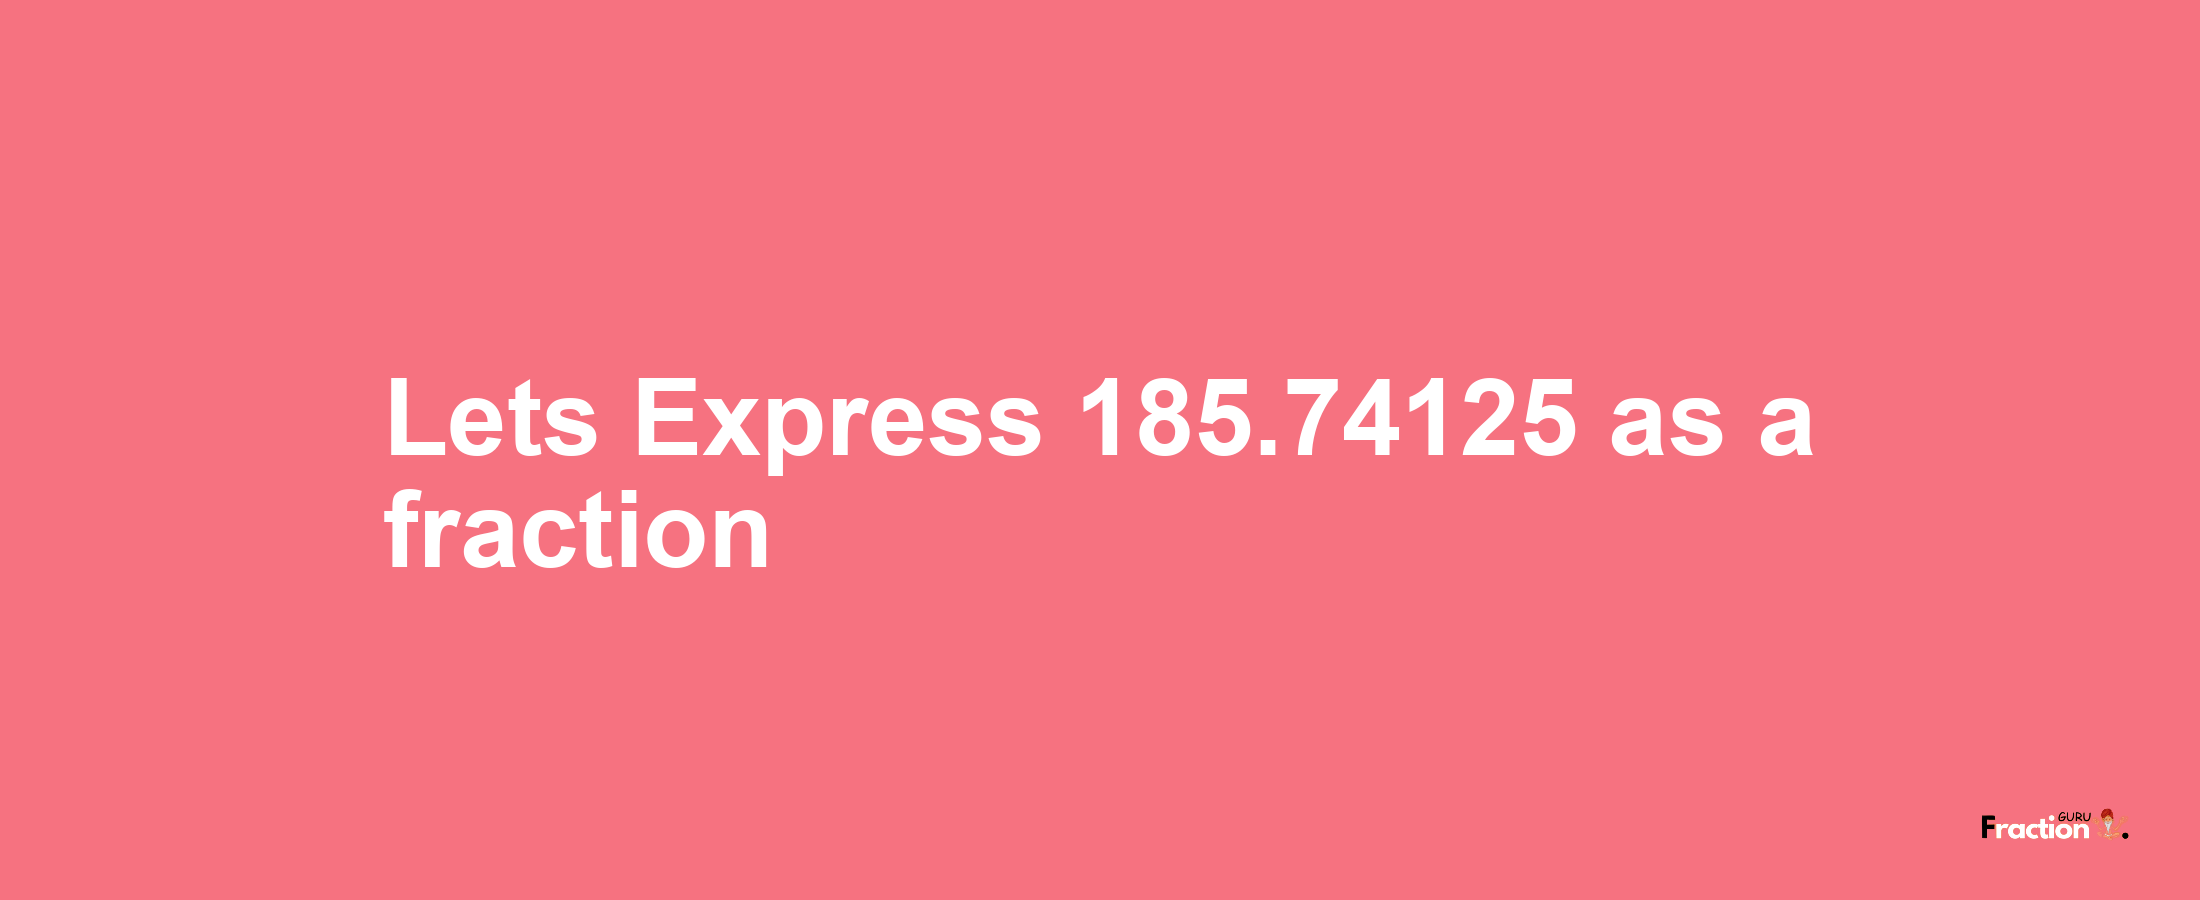 Lets Express 185.74125 as afraction